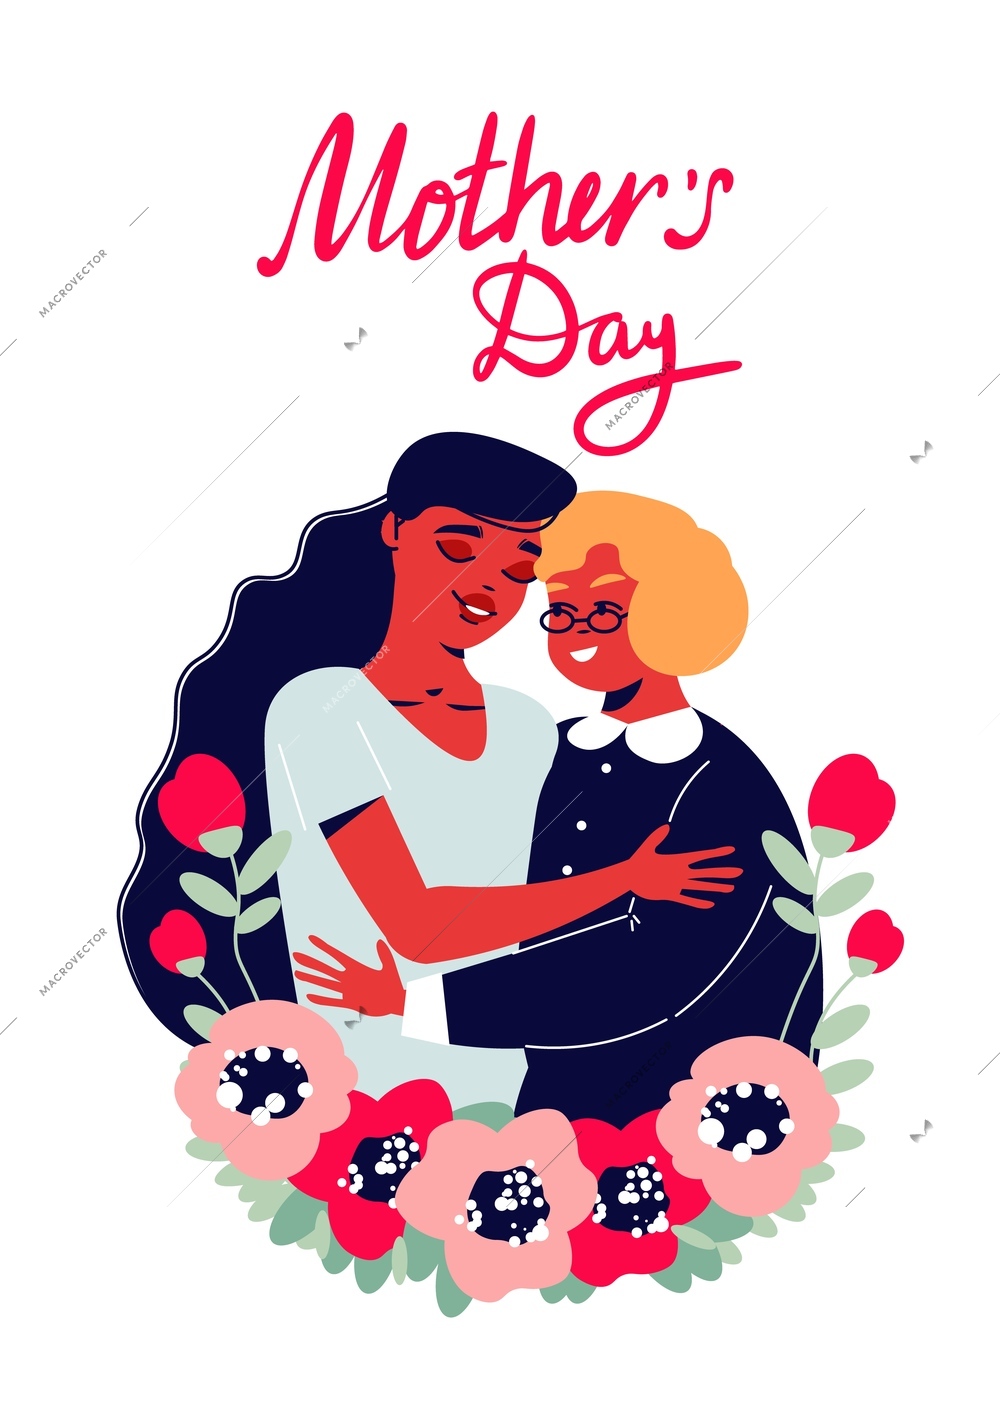 Mothers day card with doodle character of lady embracing elderly woman ornate text and flowers bunch vector illustration